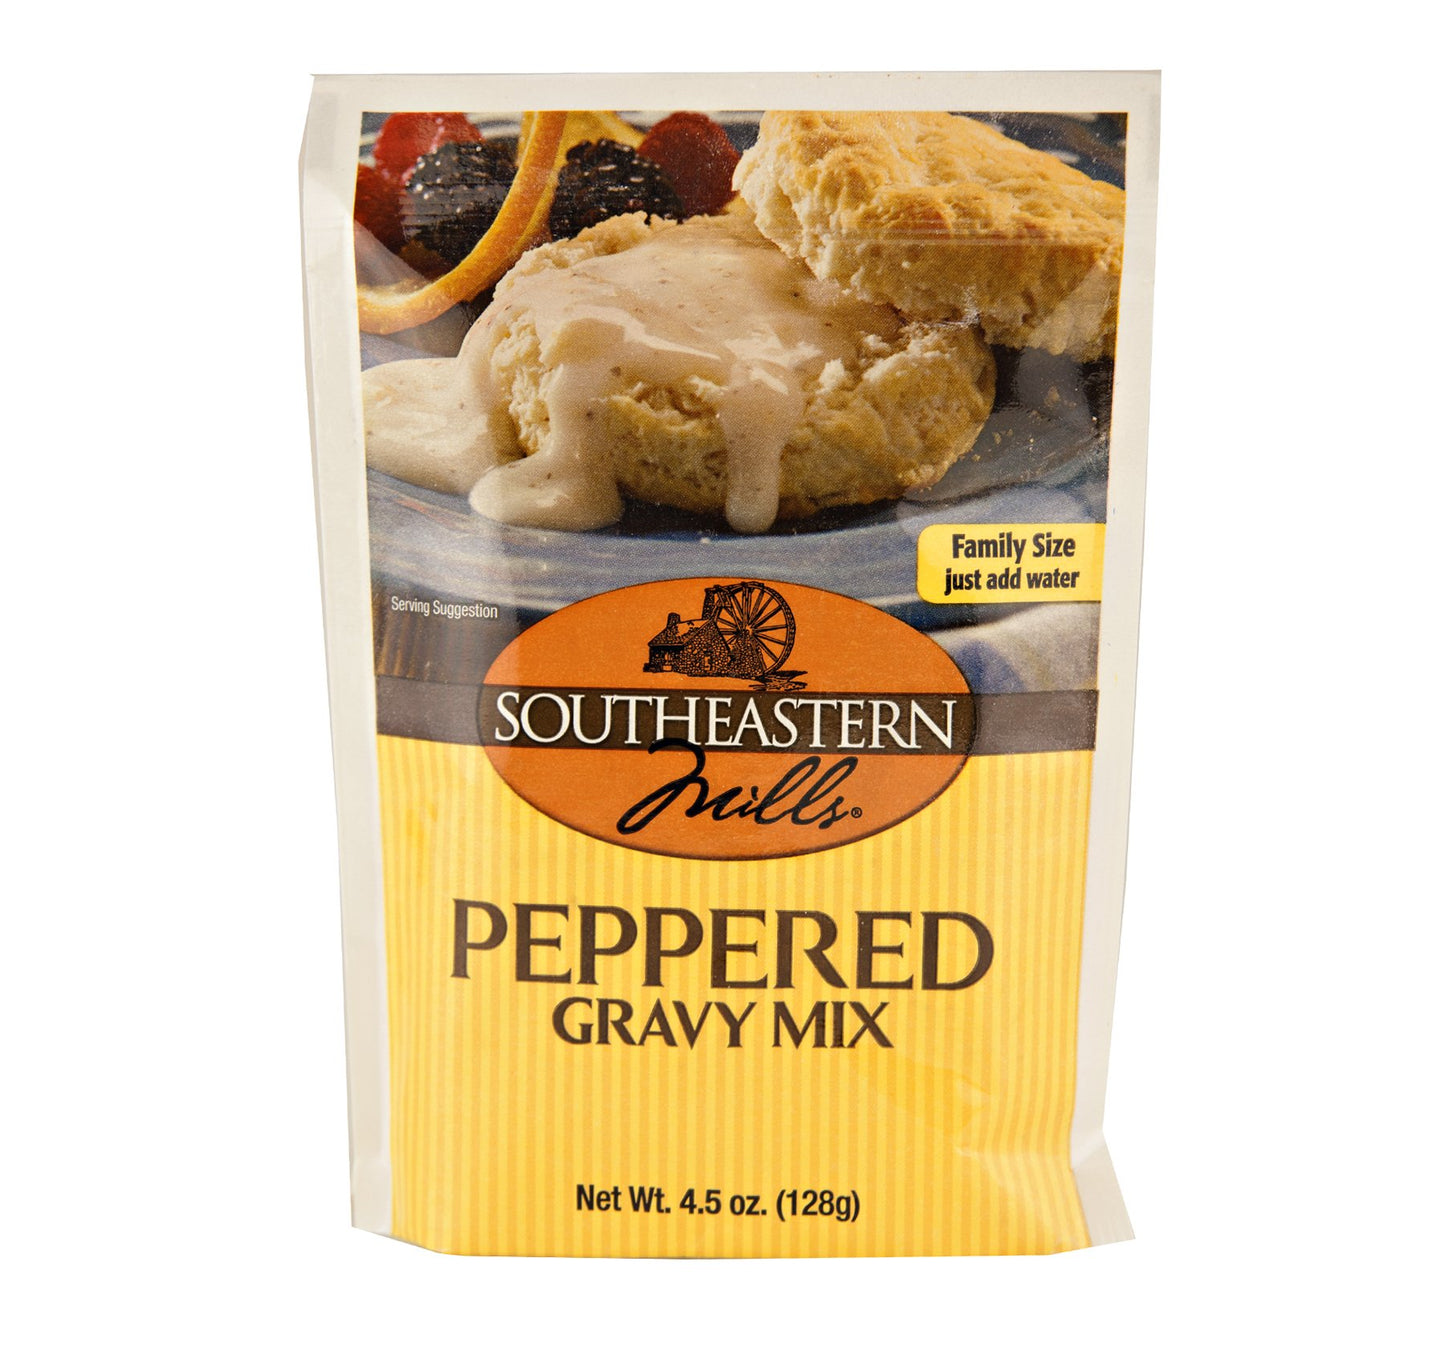 Southeastern Mills Peppered Gravy Mix 4.5oz 24 Count